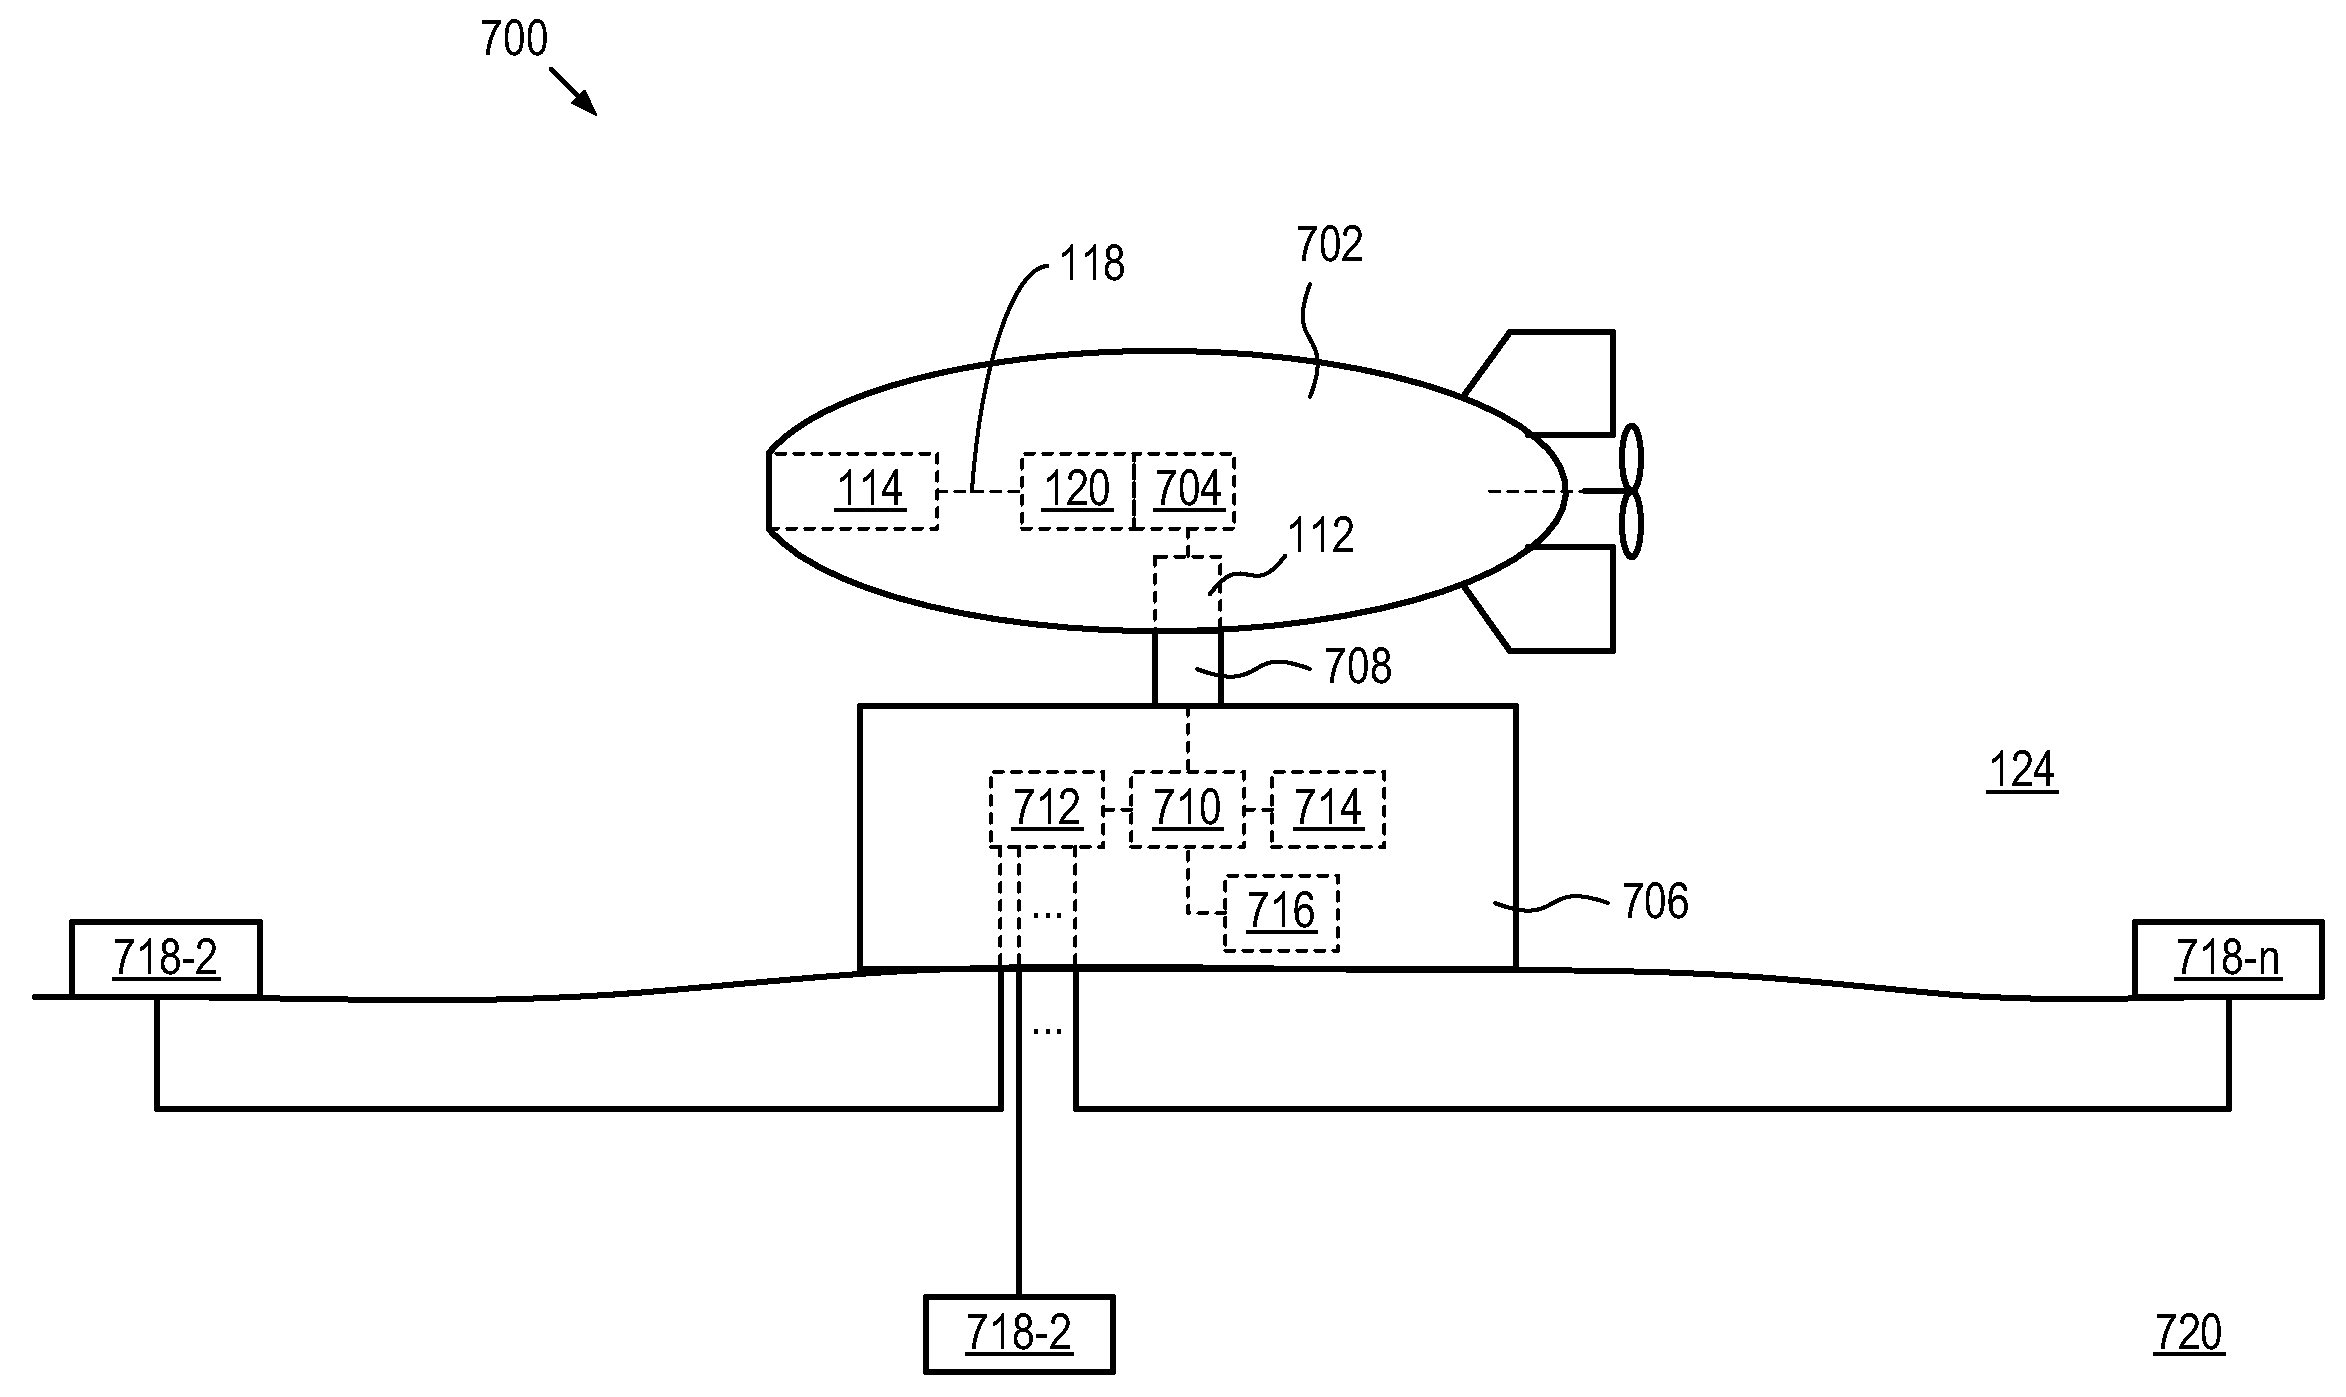 Resonant, Contactless Radio Frequency Power Coupling